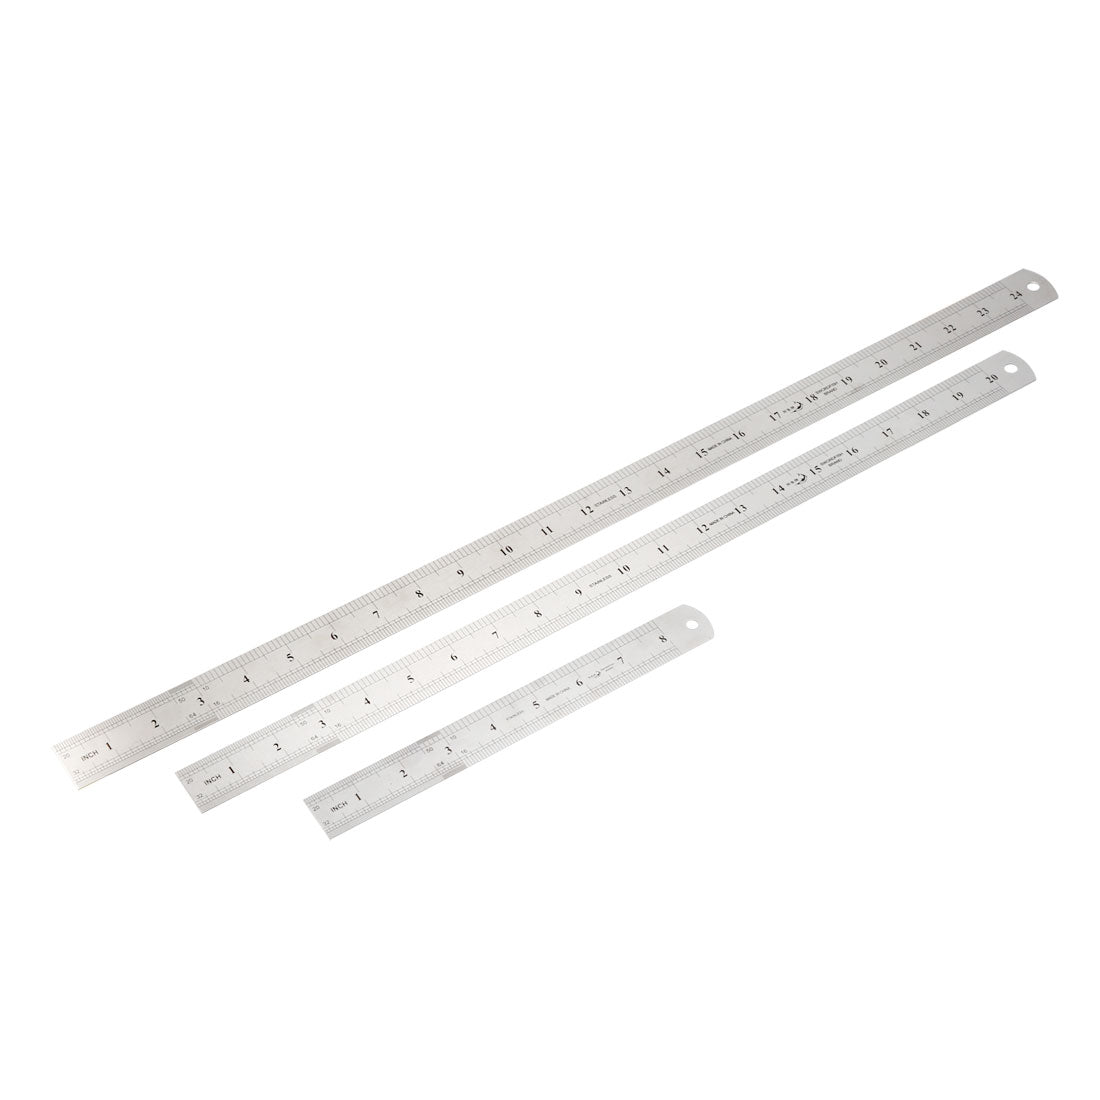 uxcell Uxcell 3 in 1 20cm 50cm 60cm Measuring Range Double Sides   Office Woodworker Metric Scale Straight Ruler Silver Tone